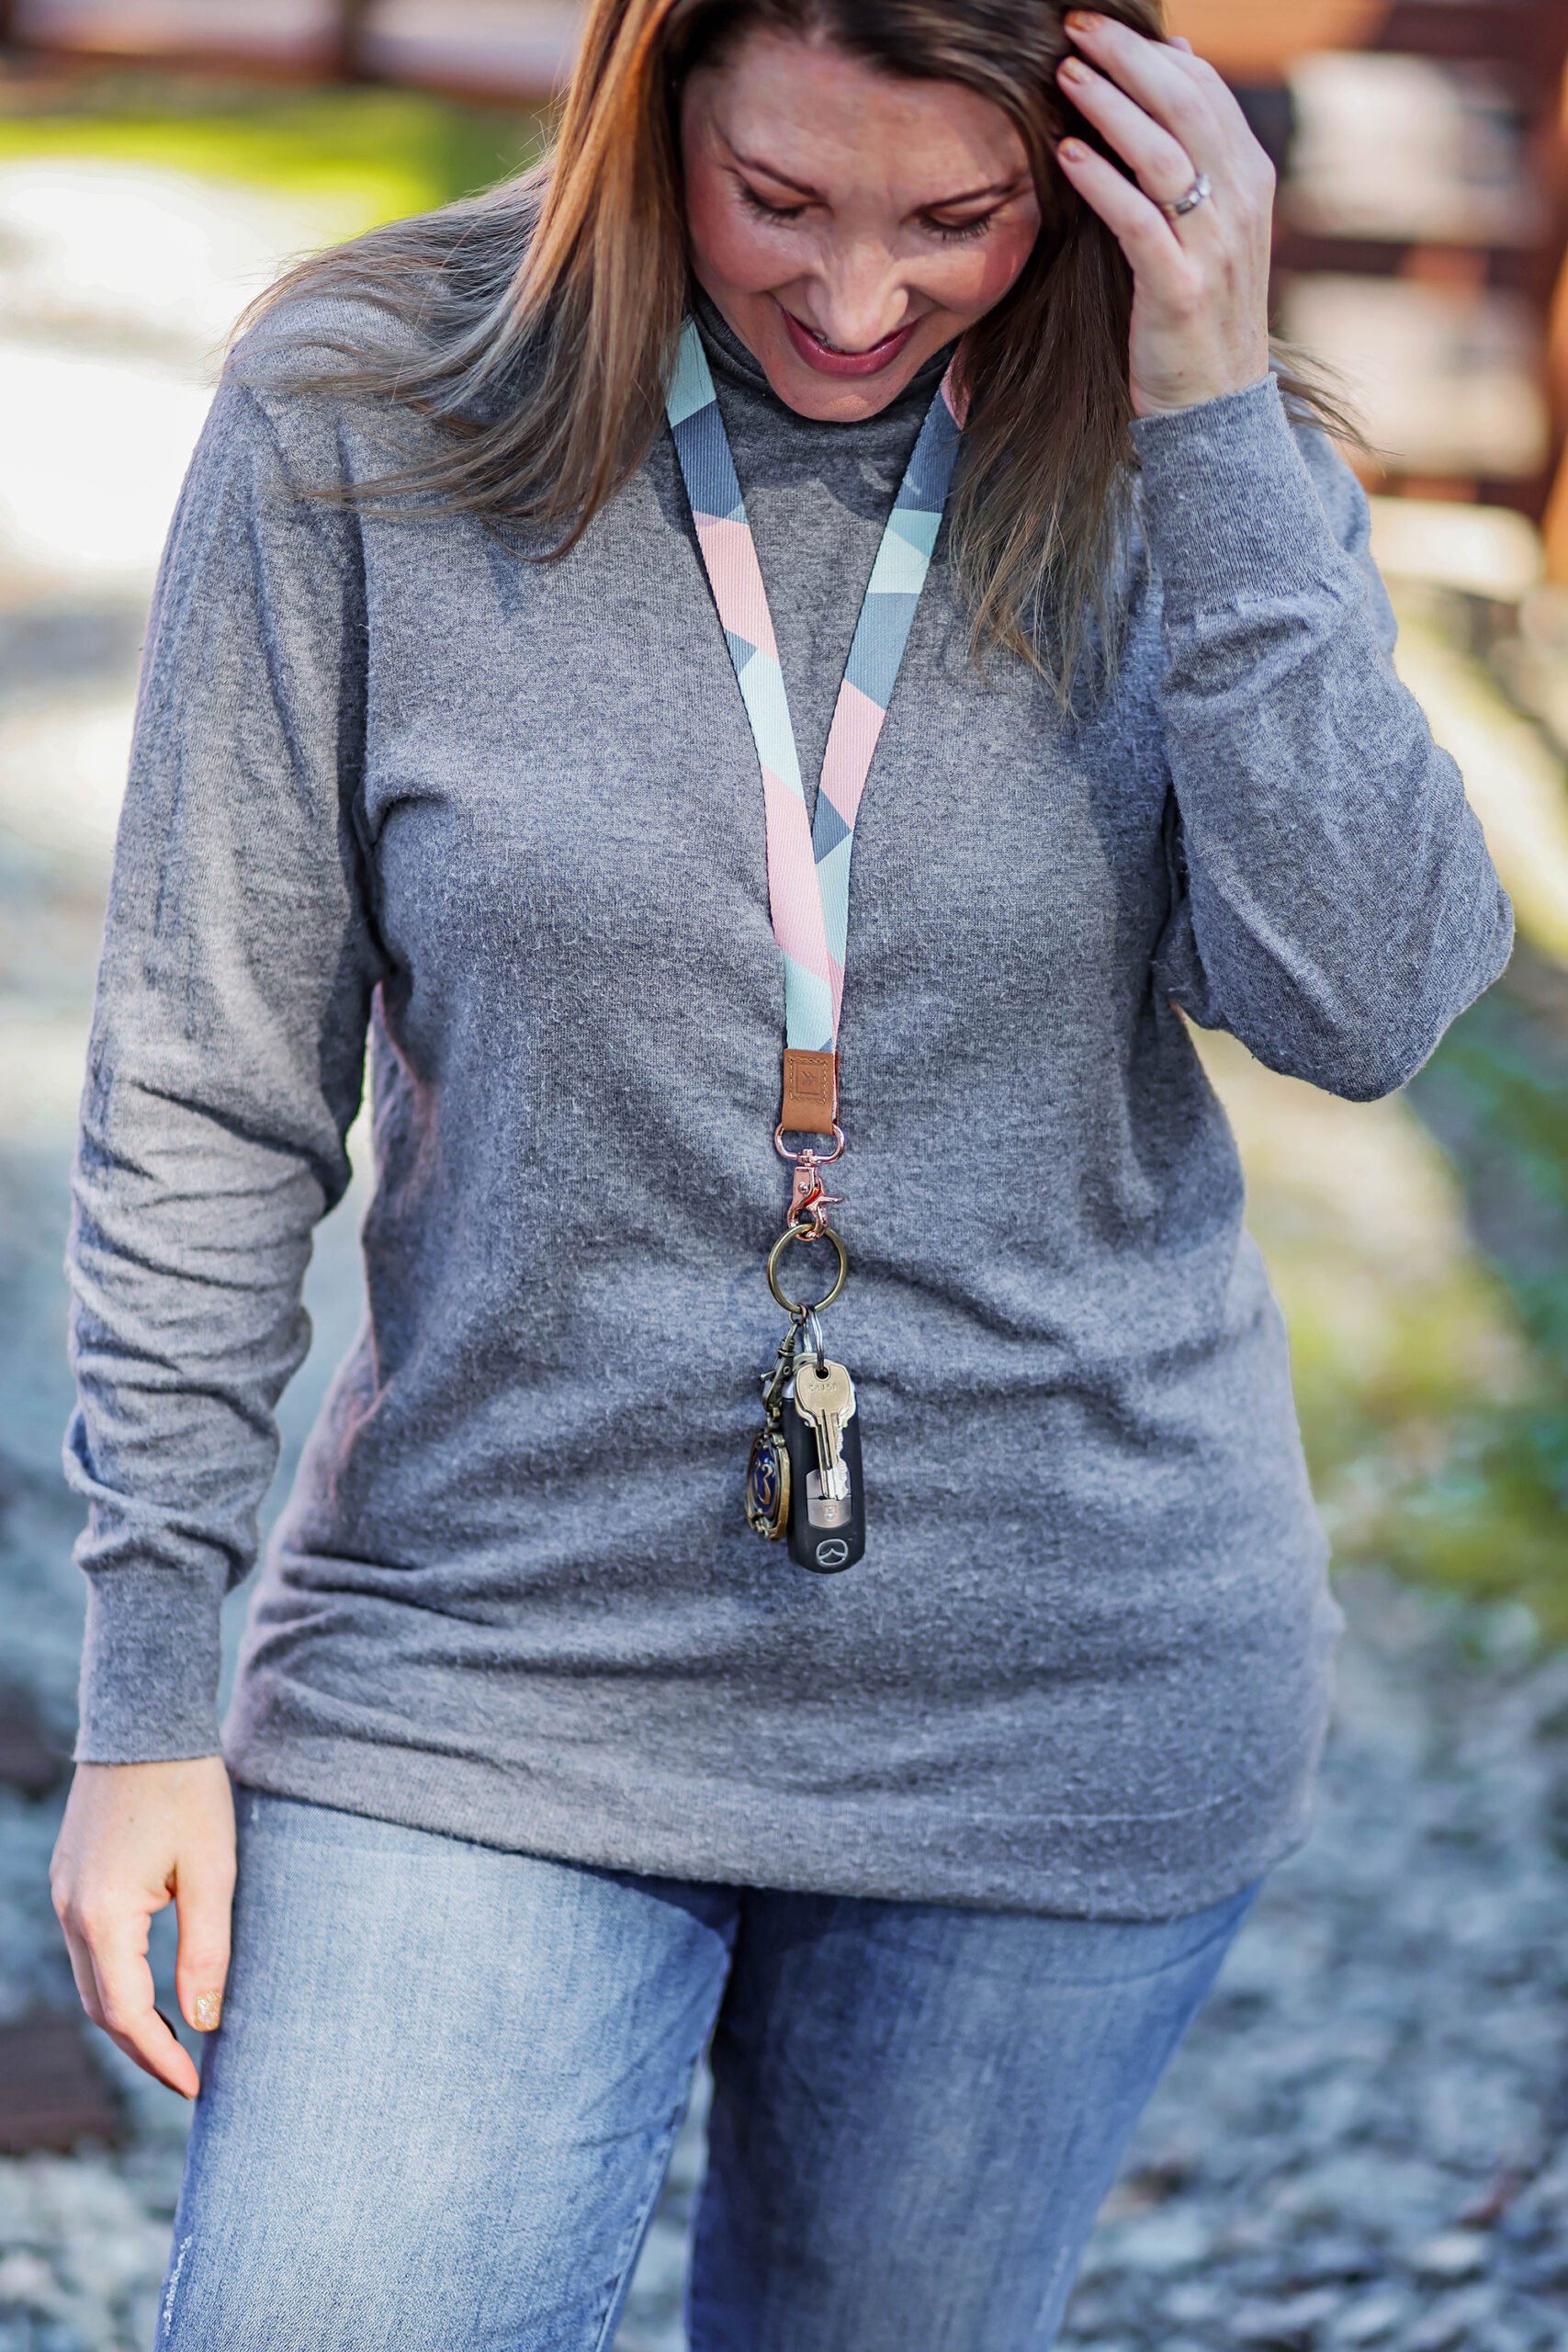 Looking for teacher outfits? Don't forget accessories like this cute lanyard!